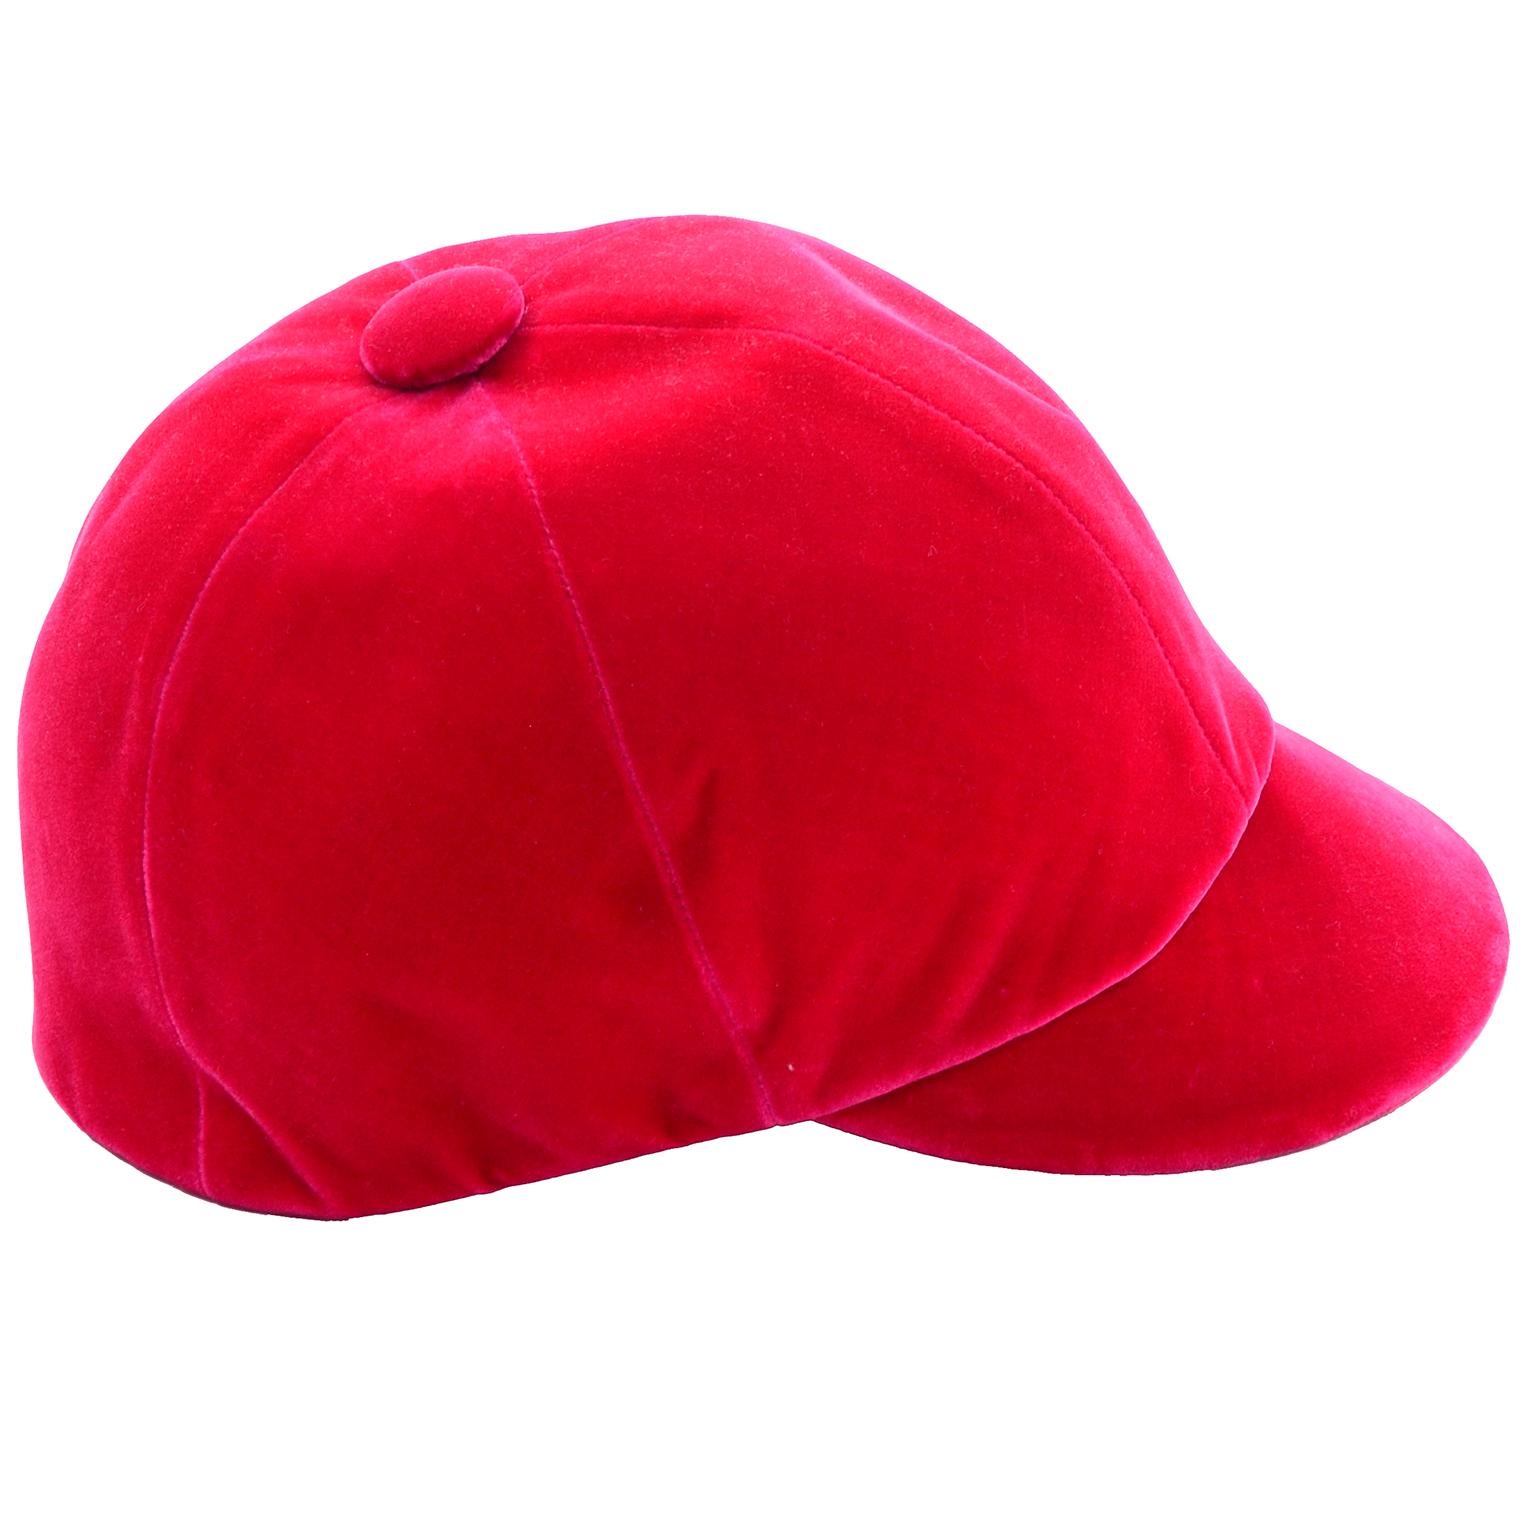 Vintage Emme Hat in Red Velvet Equestrian Riding Cap In Excellent Condition For Sale In Portland, OR